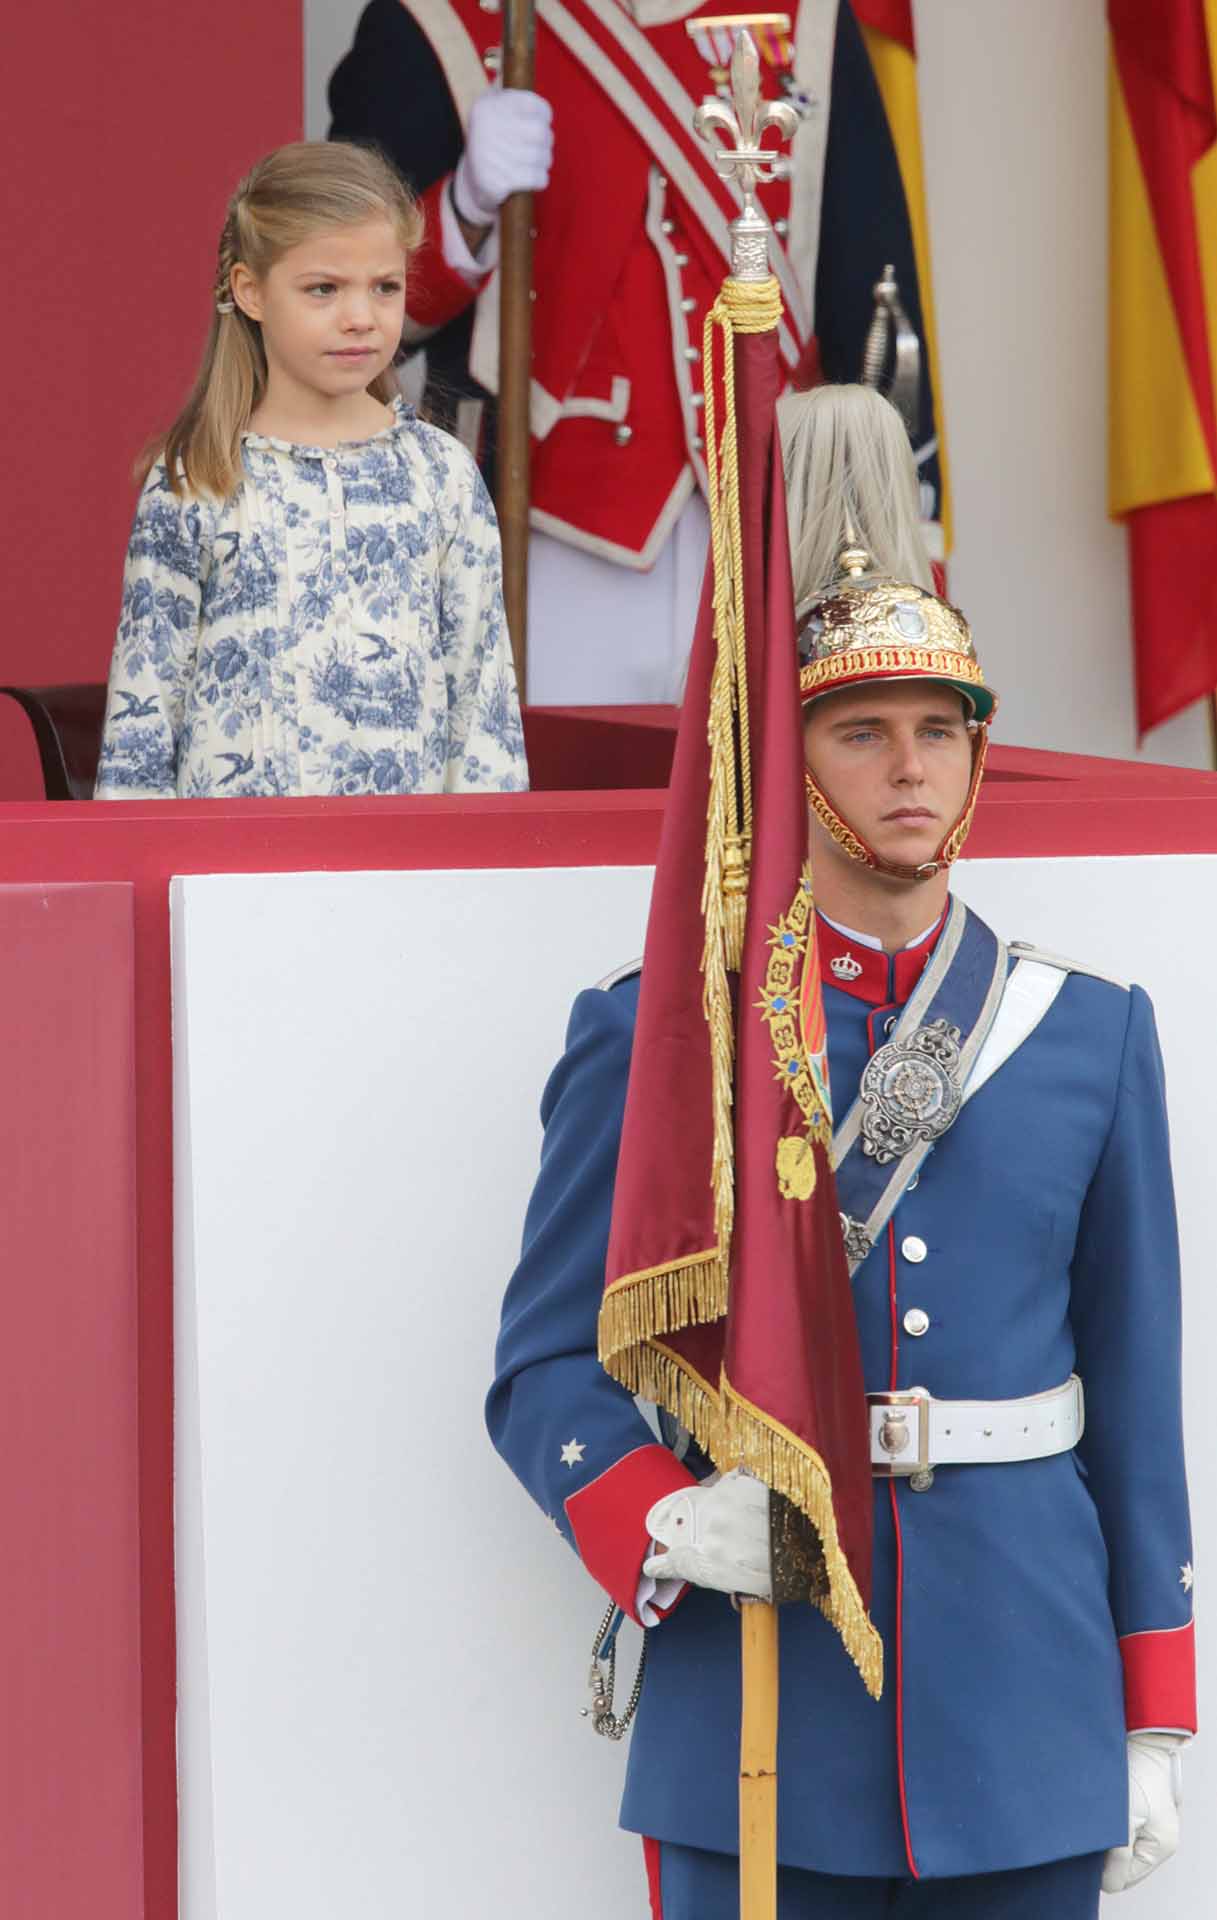 Princess Sofia of Borbon attending a military parade, during the known as Dia de la Hispanidad, Spain's National Day,  in Madrid, Spain, Sunday, Oct. 12, 2014.